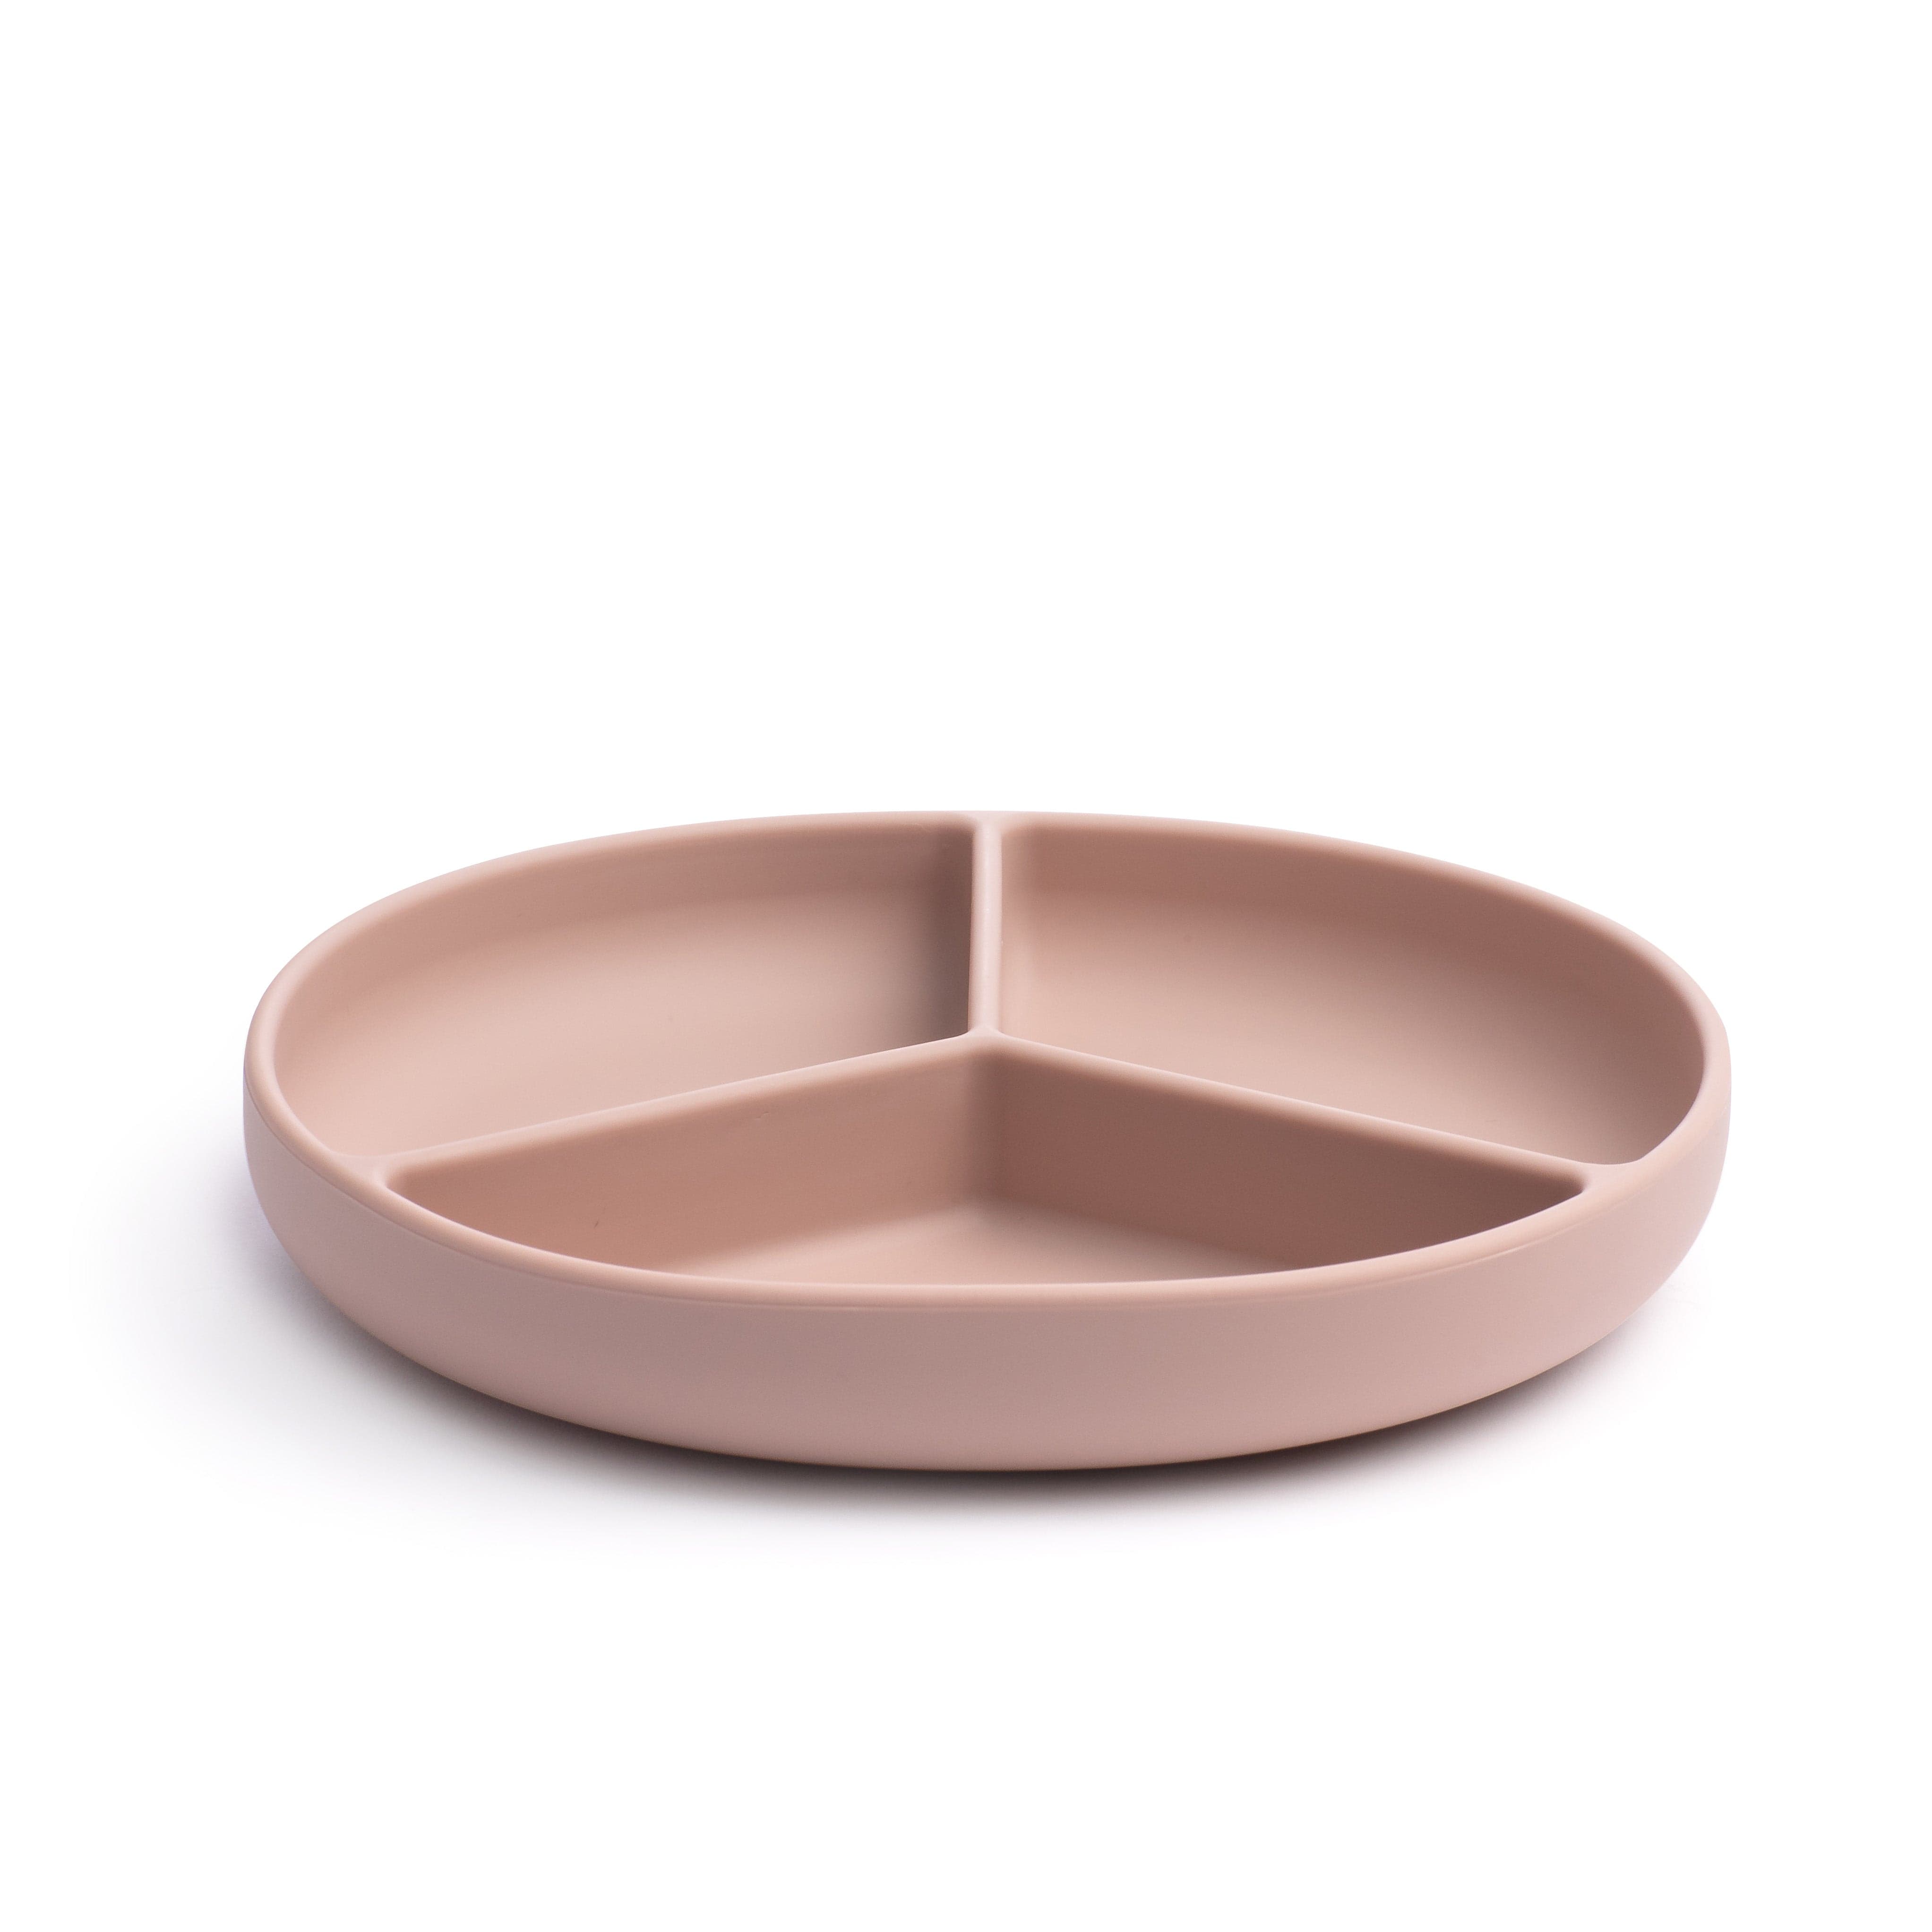 Pippeta Tabelweare Silicone Suction Plate (Ash Rose)